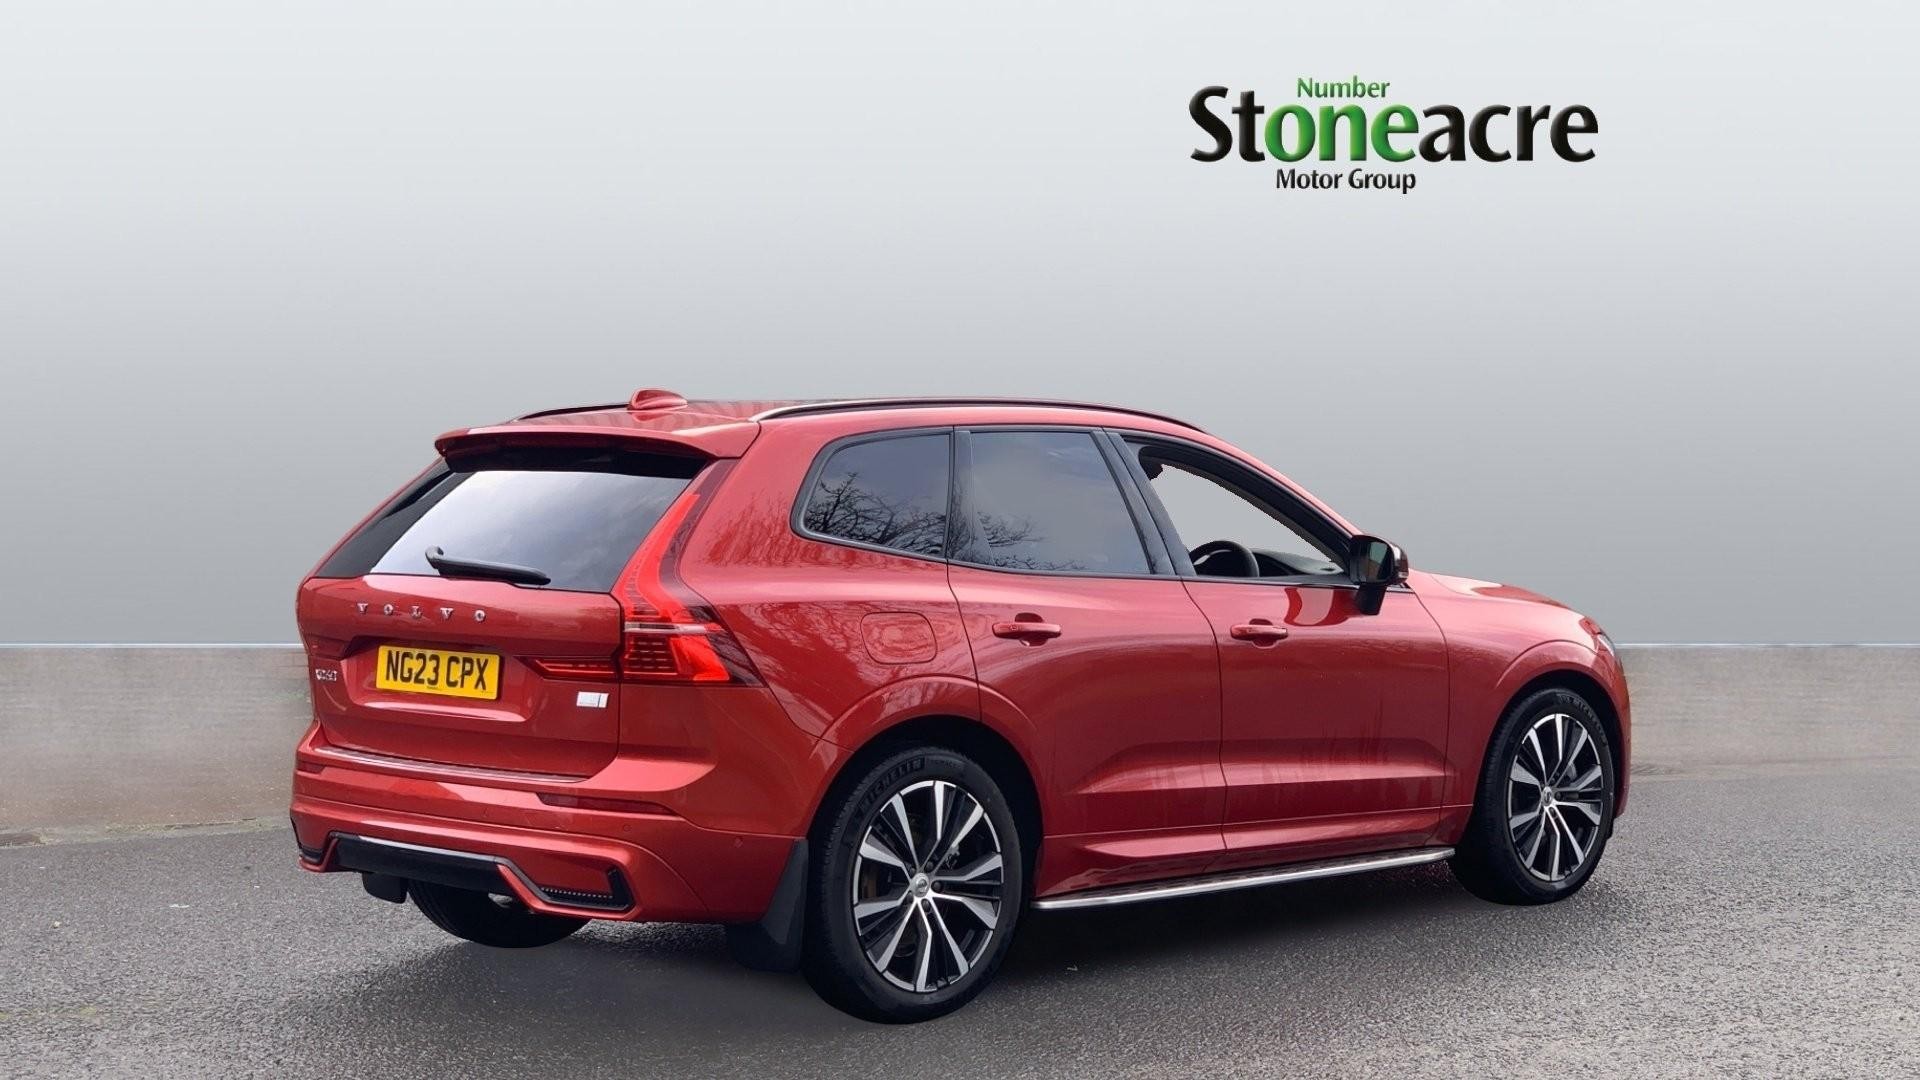 Volvo XC60 2.0 T8 [455] RC PHEV Ultimate Dark 5dr AWD Gtron (NG23CPX) image 6